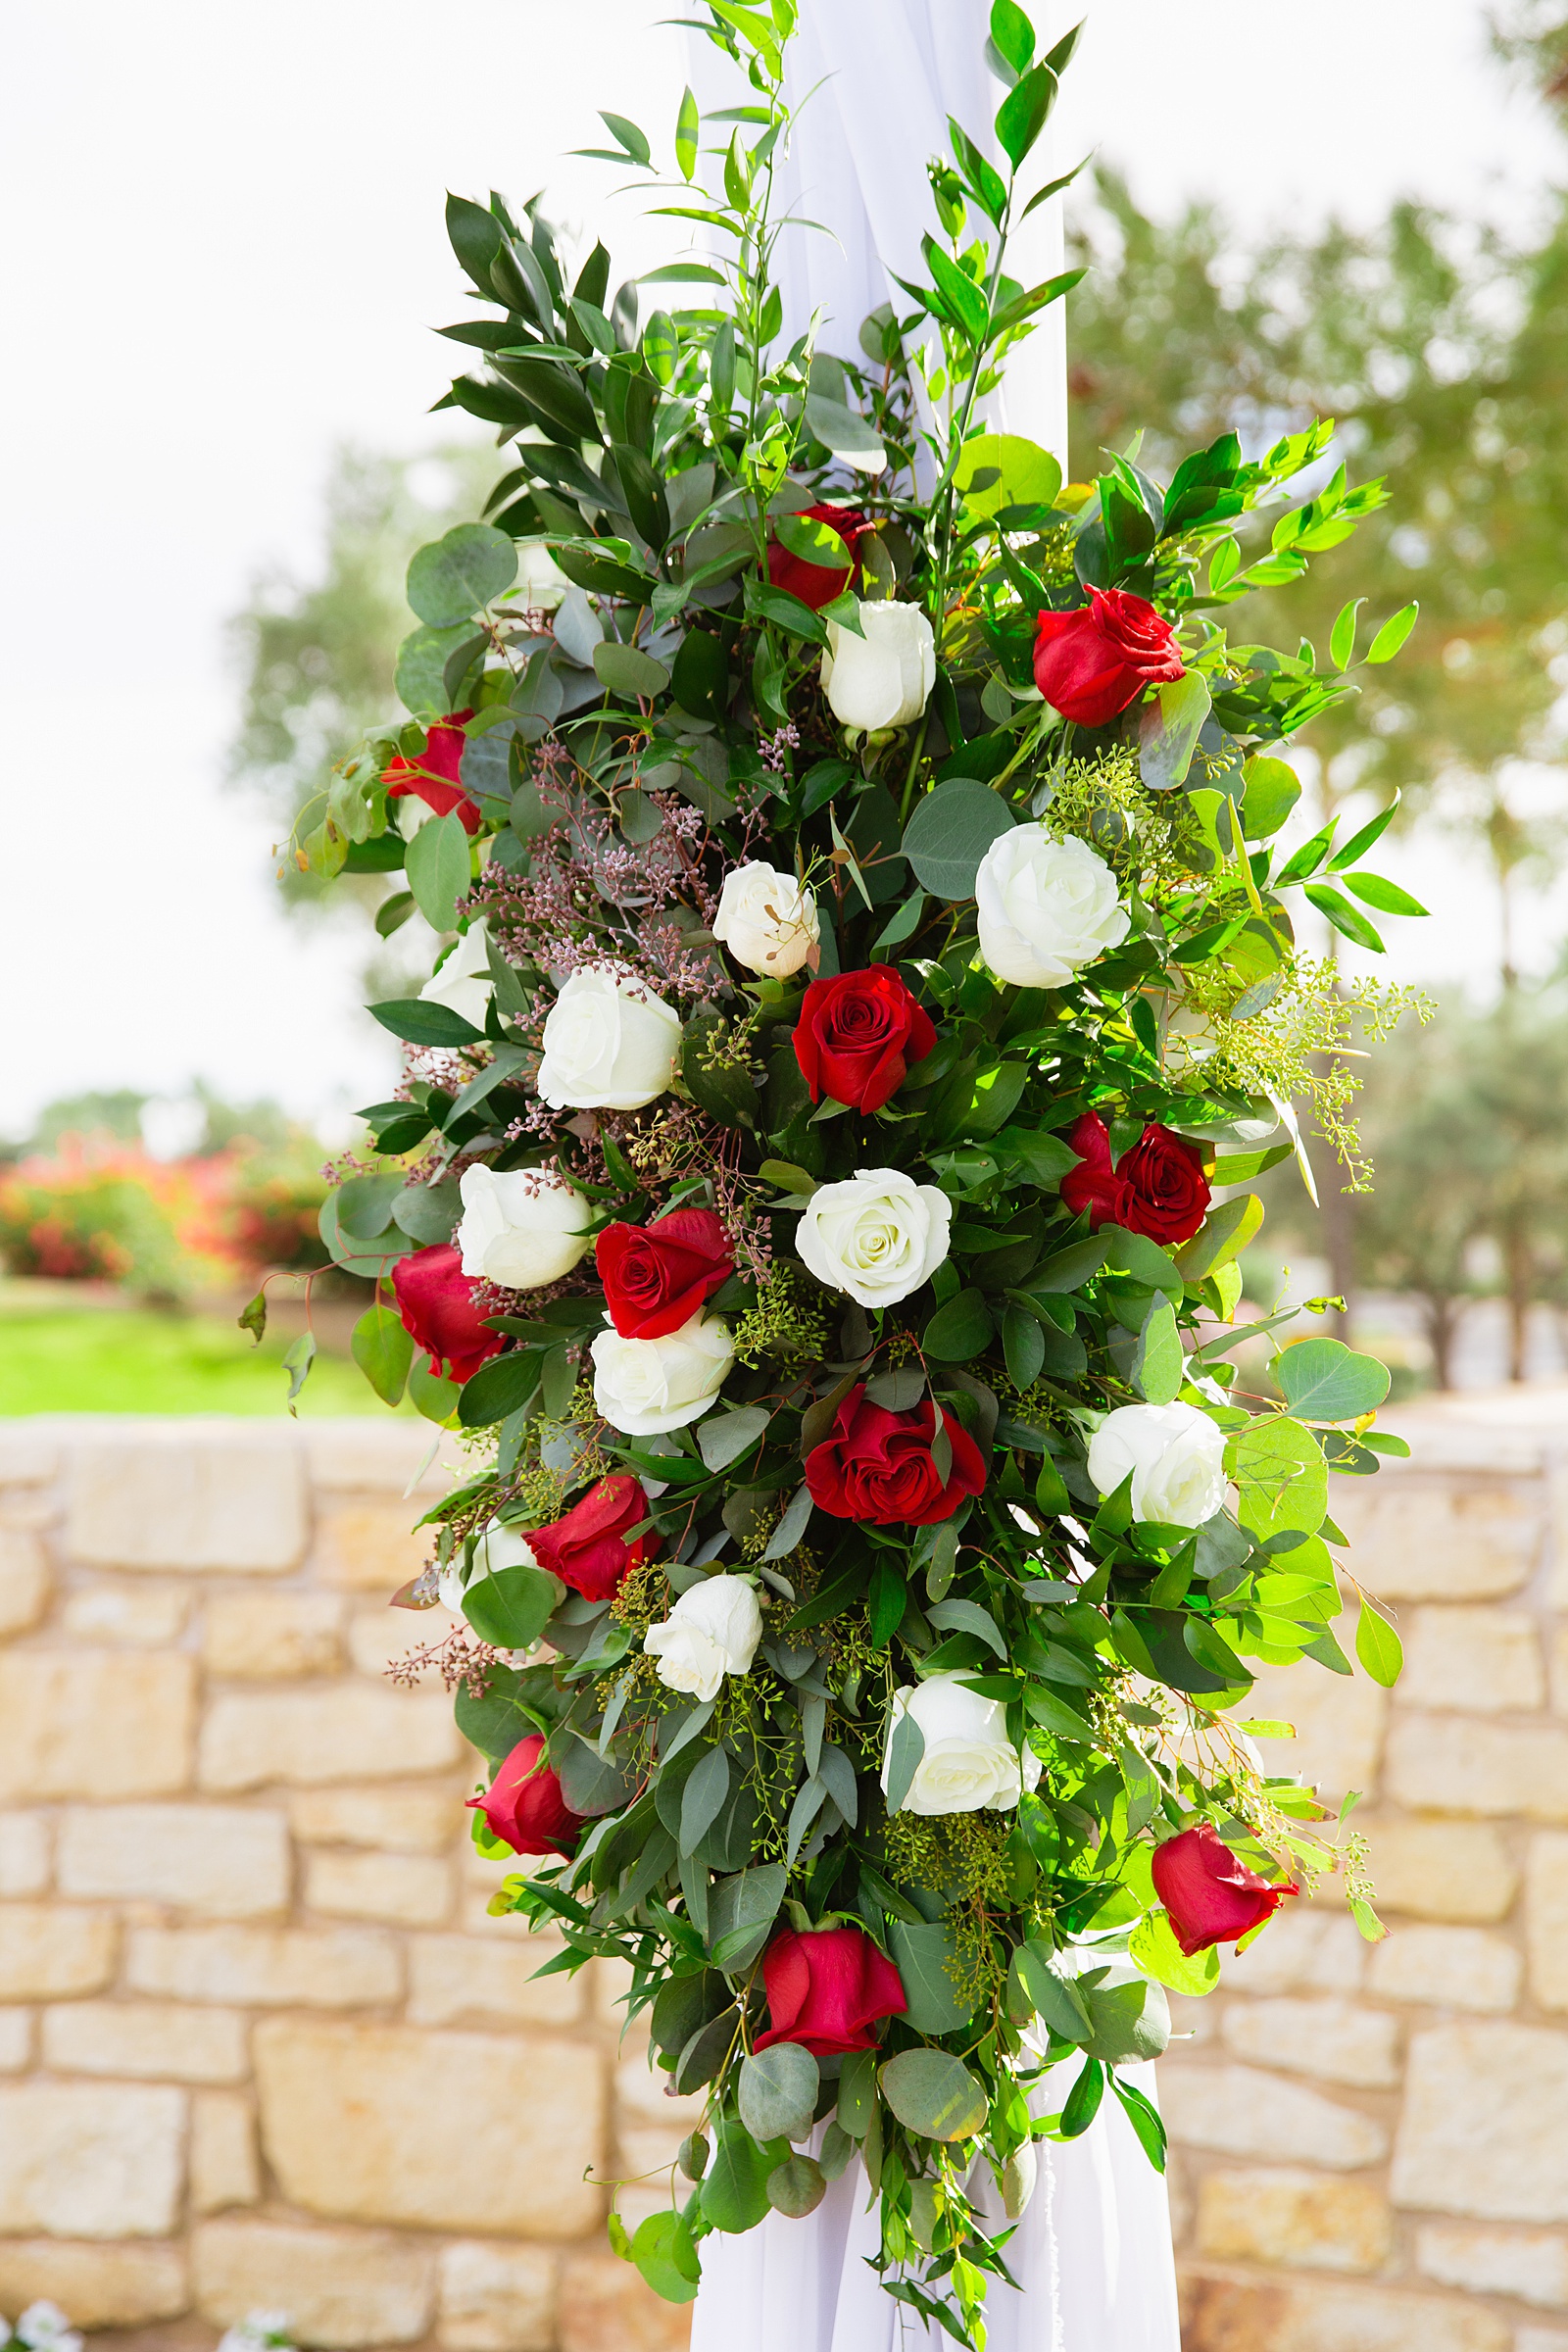 Wedding ceremony arch florals with red and white roses at Ocotillo Oasis by Phoenix wedding photographer PMA Photography.